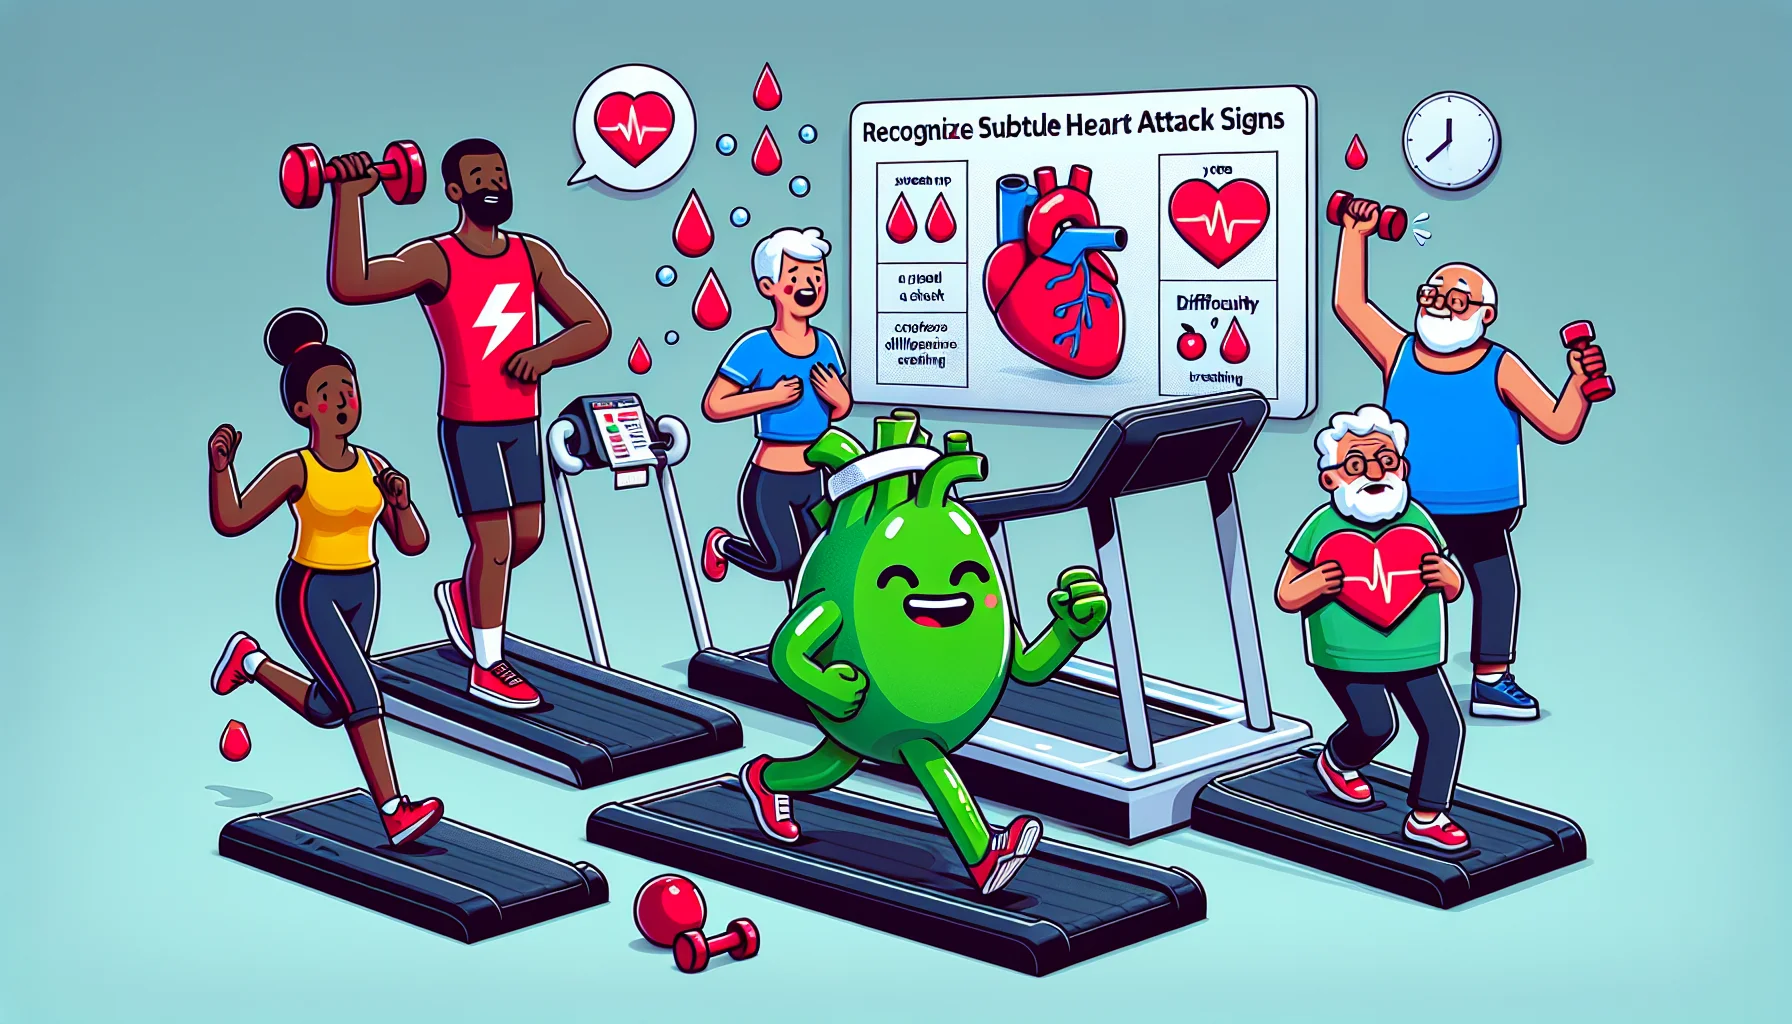 Generate a humorous image depicting a typical everyday scene, where a diverse group of people are engaging in various forms of exercise: a Black woman running on a treadmill with a sweatband and vibrant workout clothes, a Hispanic man lifting weights, and a South Asian woman practicing yoga. Integrate subtle visual cues that represent heart attack symptoms: an infographic on the gym wall with icons like sweat drops, hand gripping the chest, and difficulty breathing. Furthermore, have a playful green mascot designed to resemble a healthy heart, cheering them on with a sign that says 'Recognize Subtle Heart Attack Signs for a Healthy Lifestyle.'